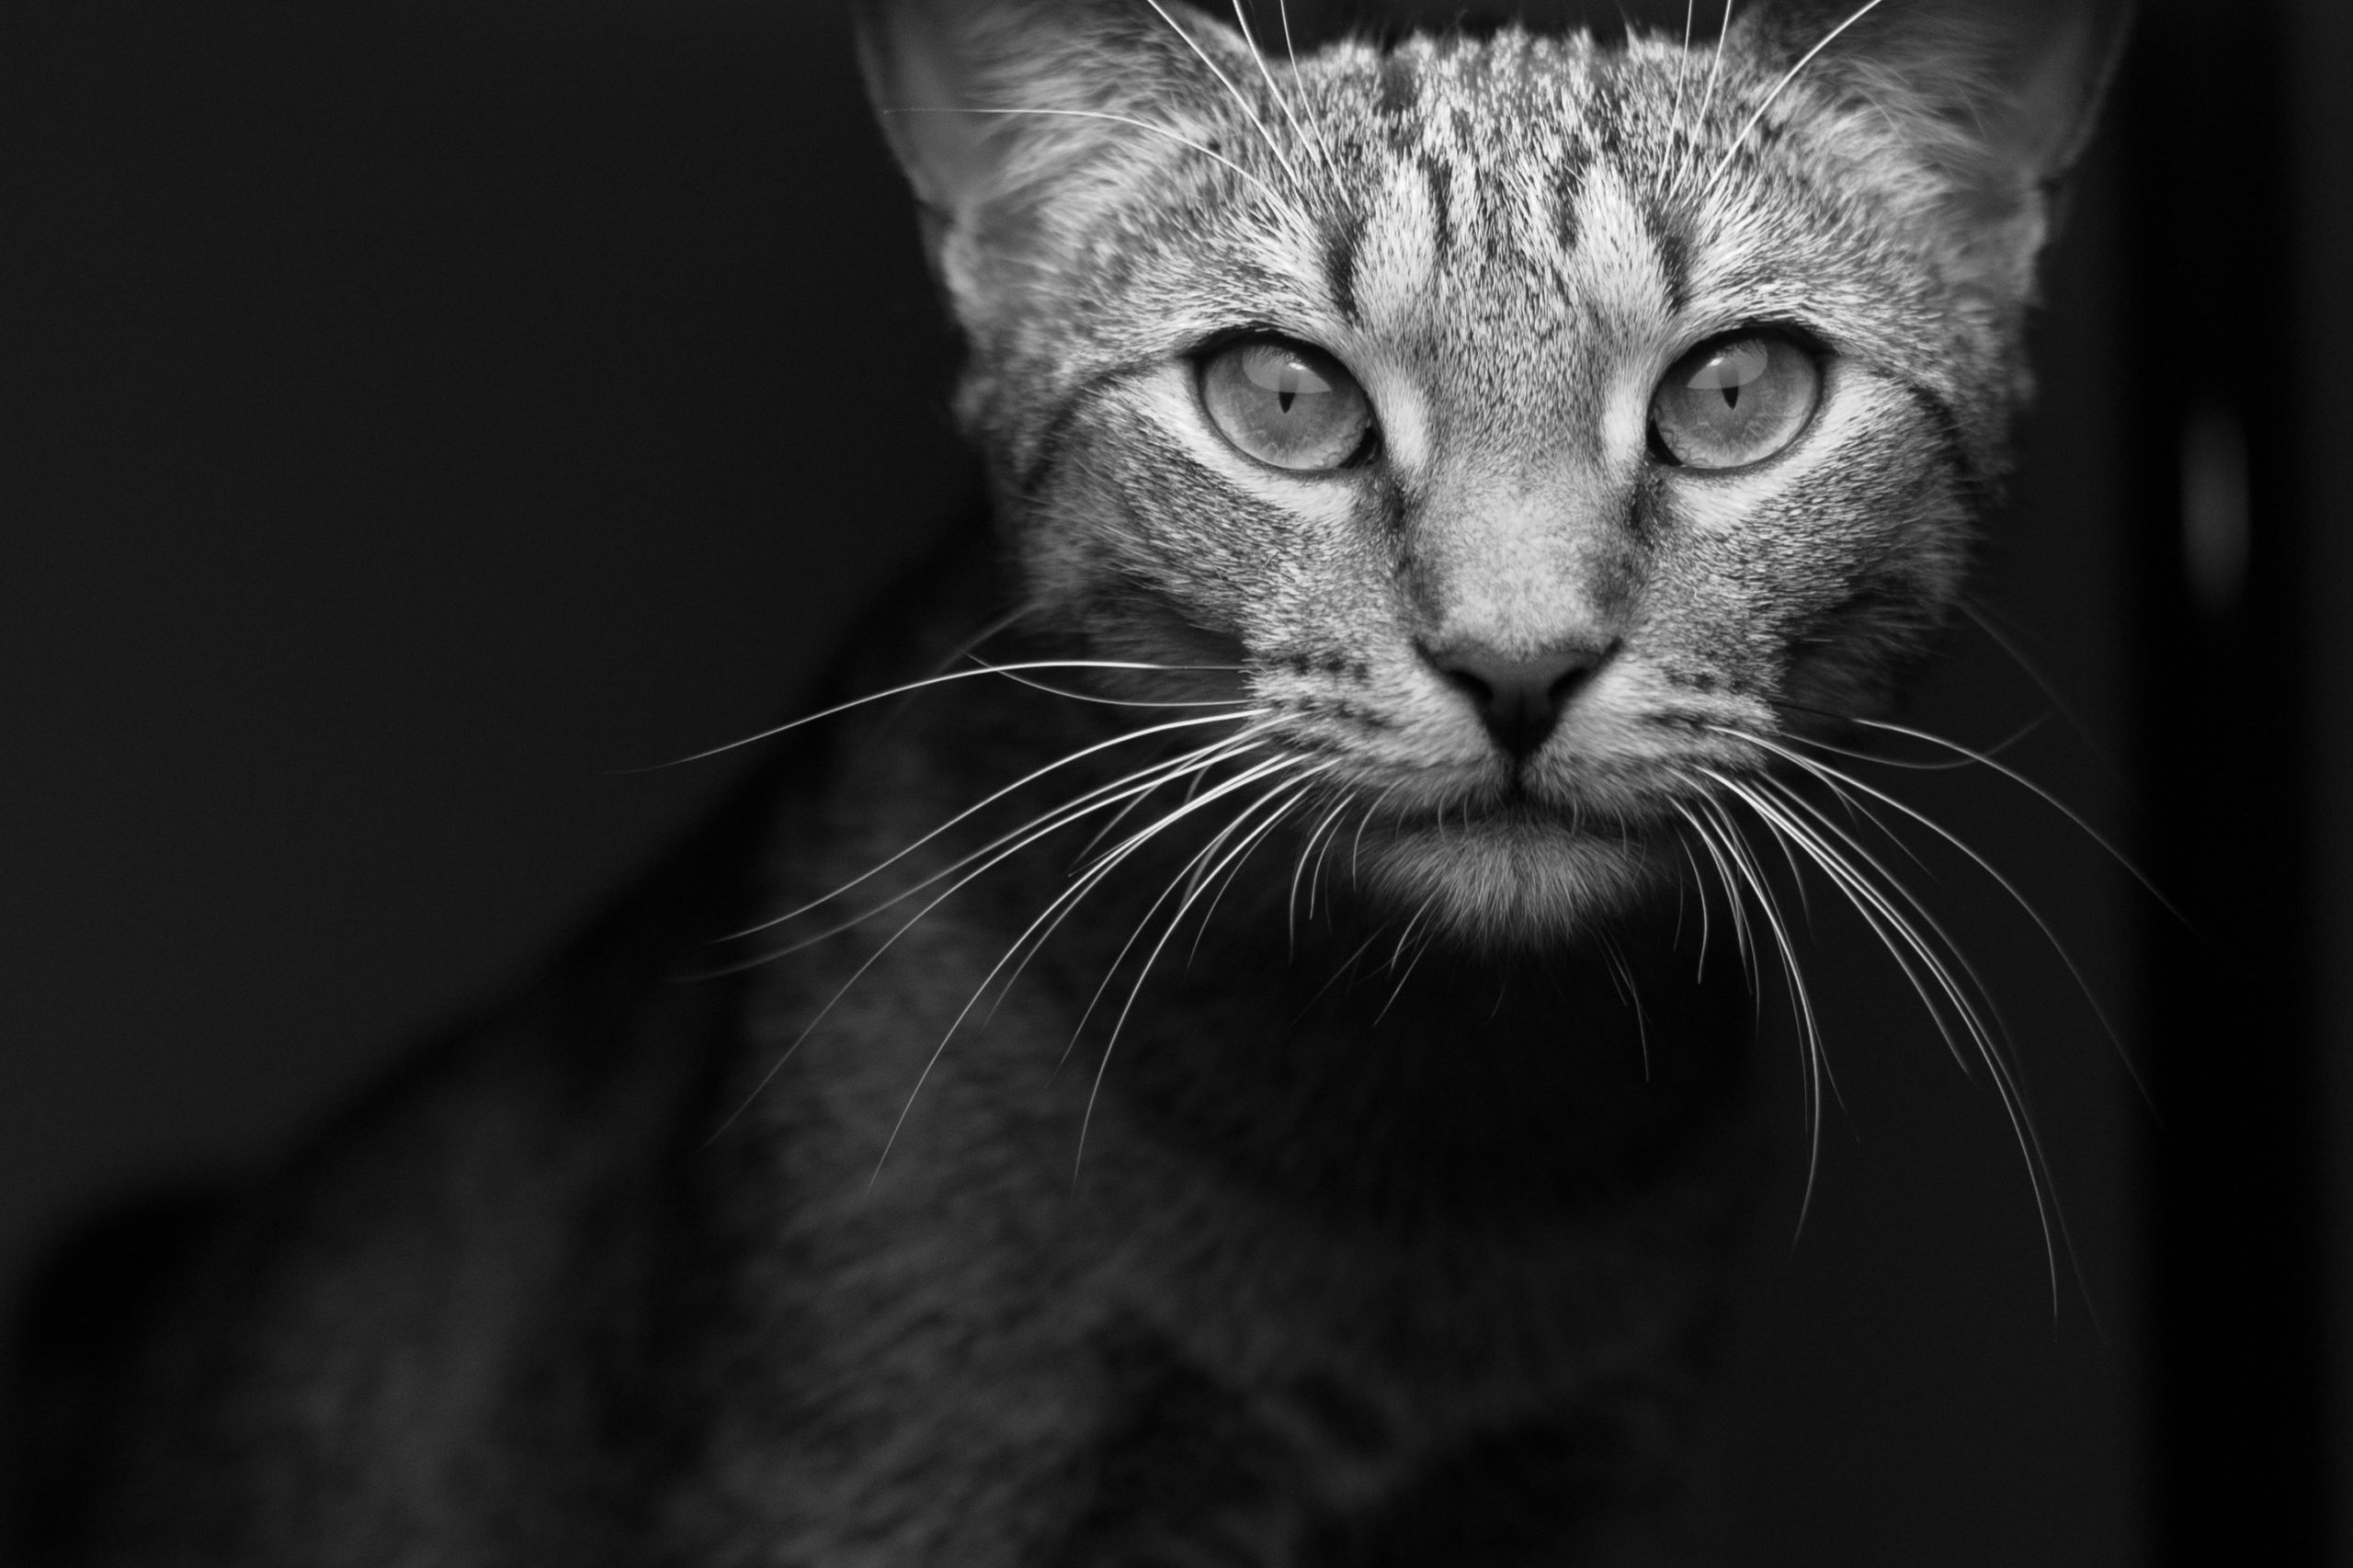 Background Wallpaper Cat Pet Feline Face White Black - Black And White Photo Of A Cat - HD Wallpaper 